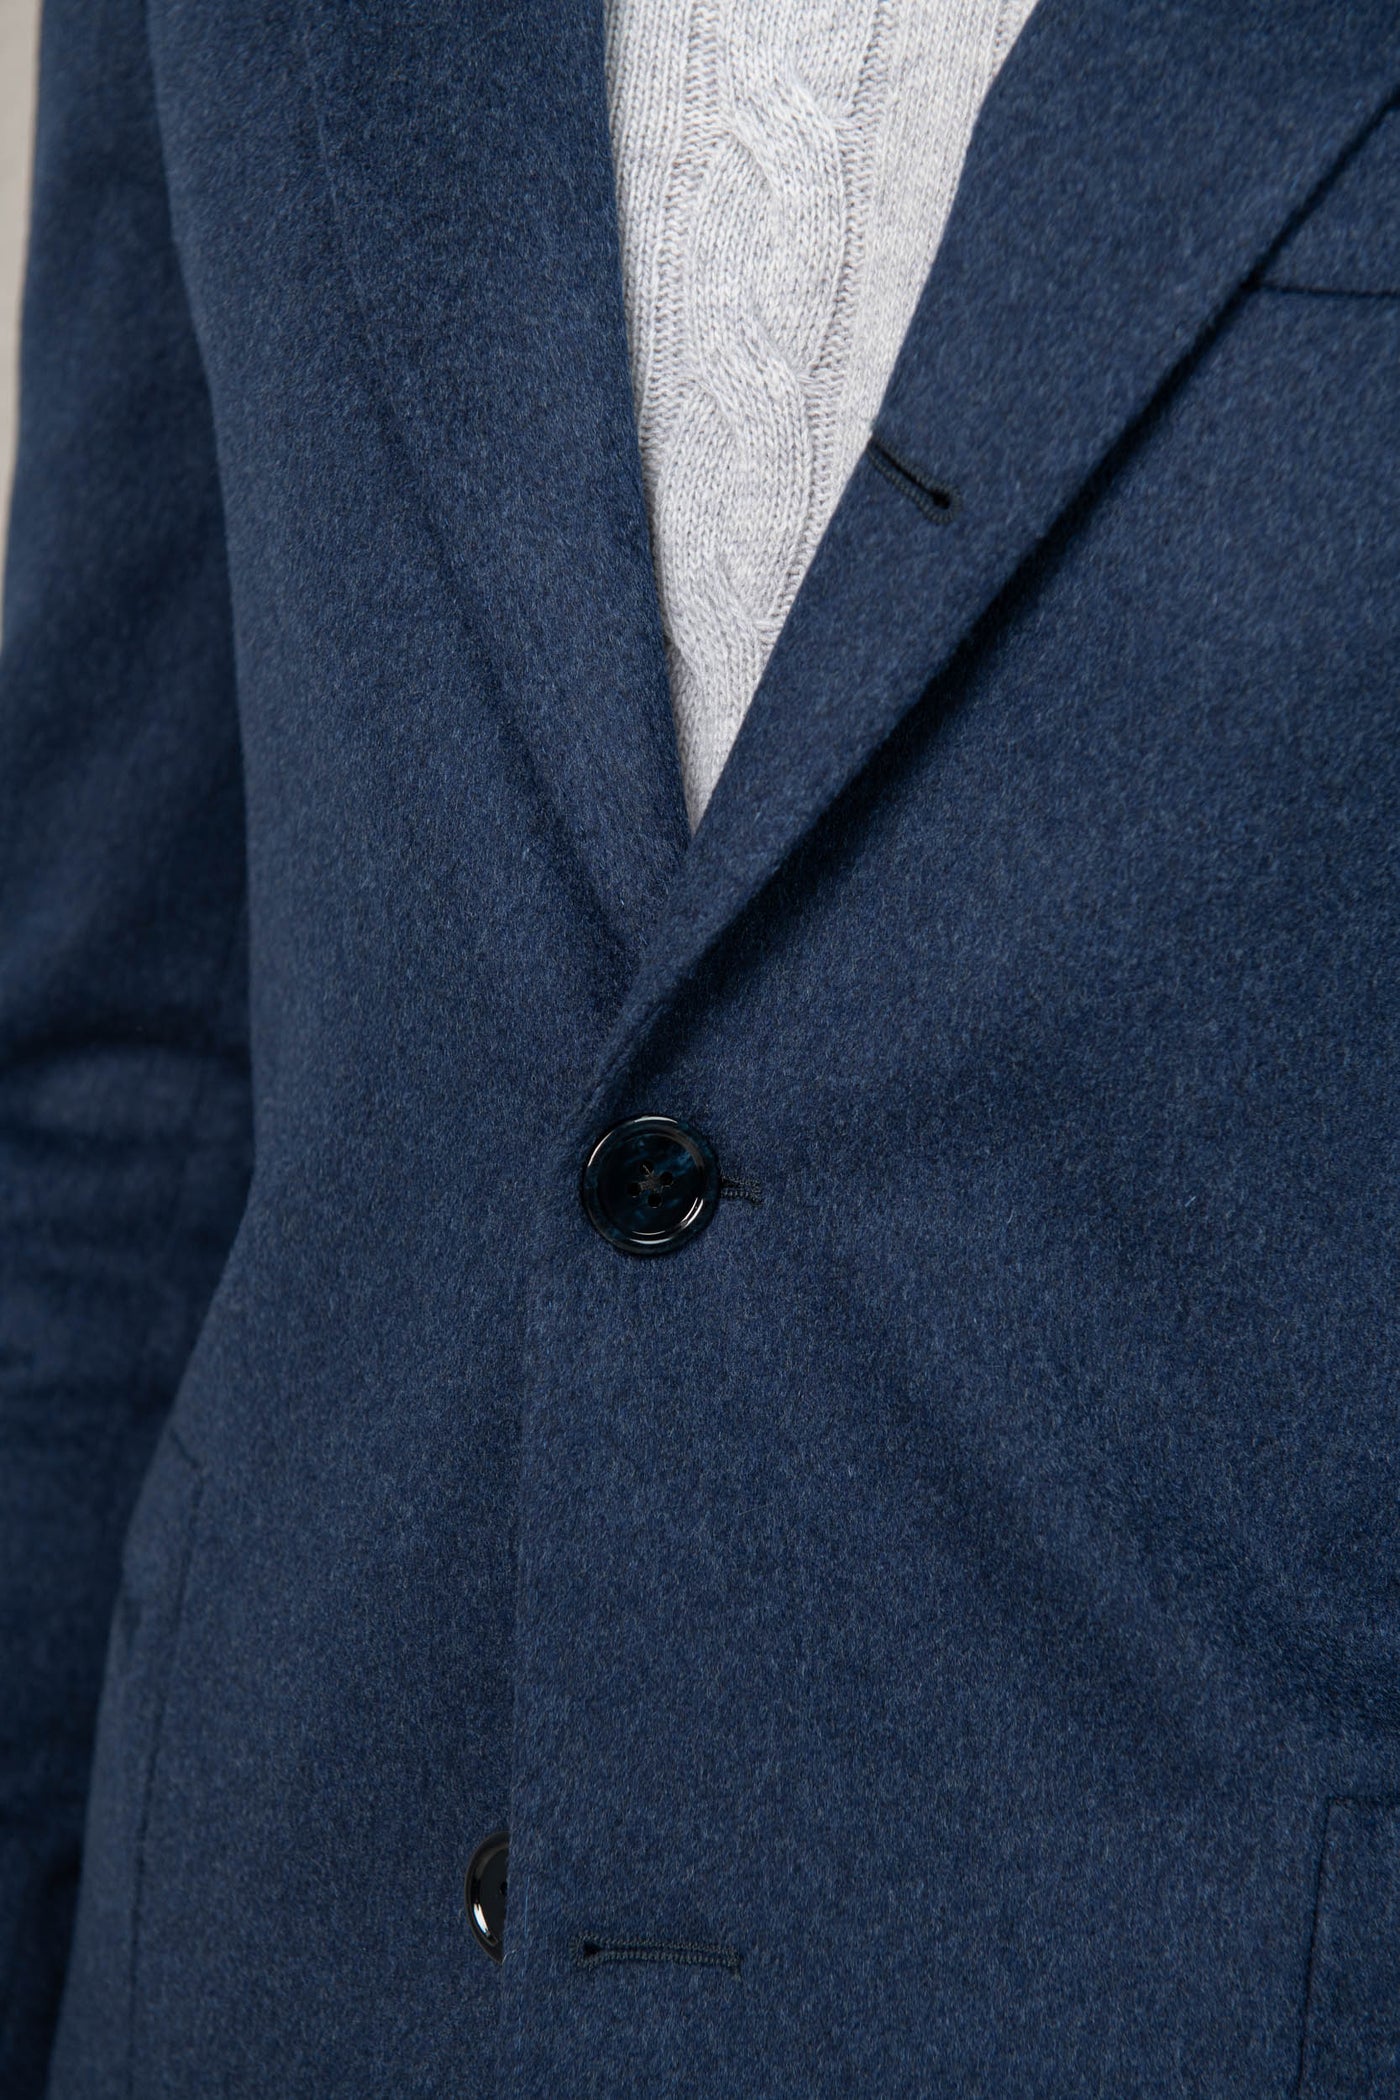 WOOLEN BLUE COAT | Made in Italy | Pini Parma